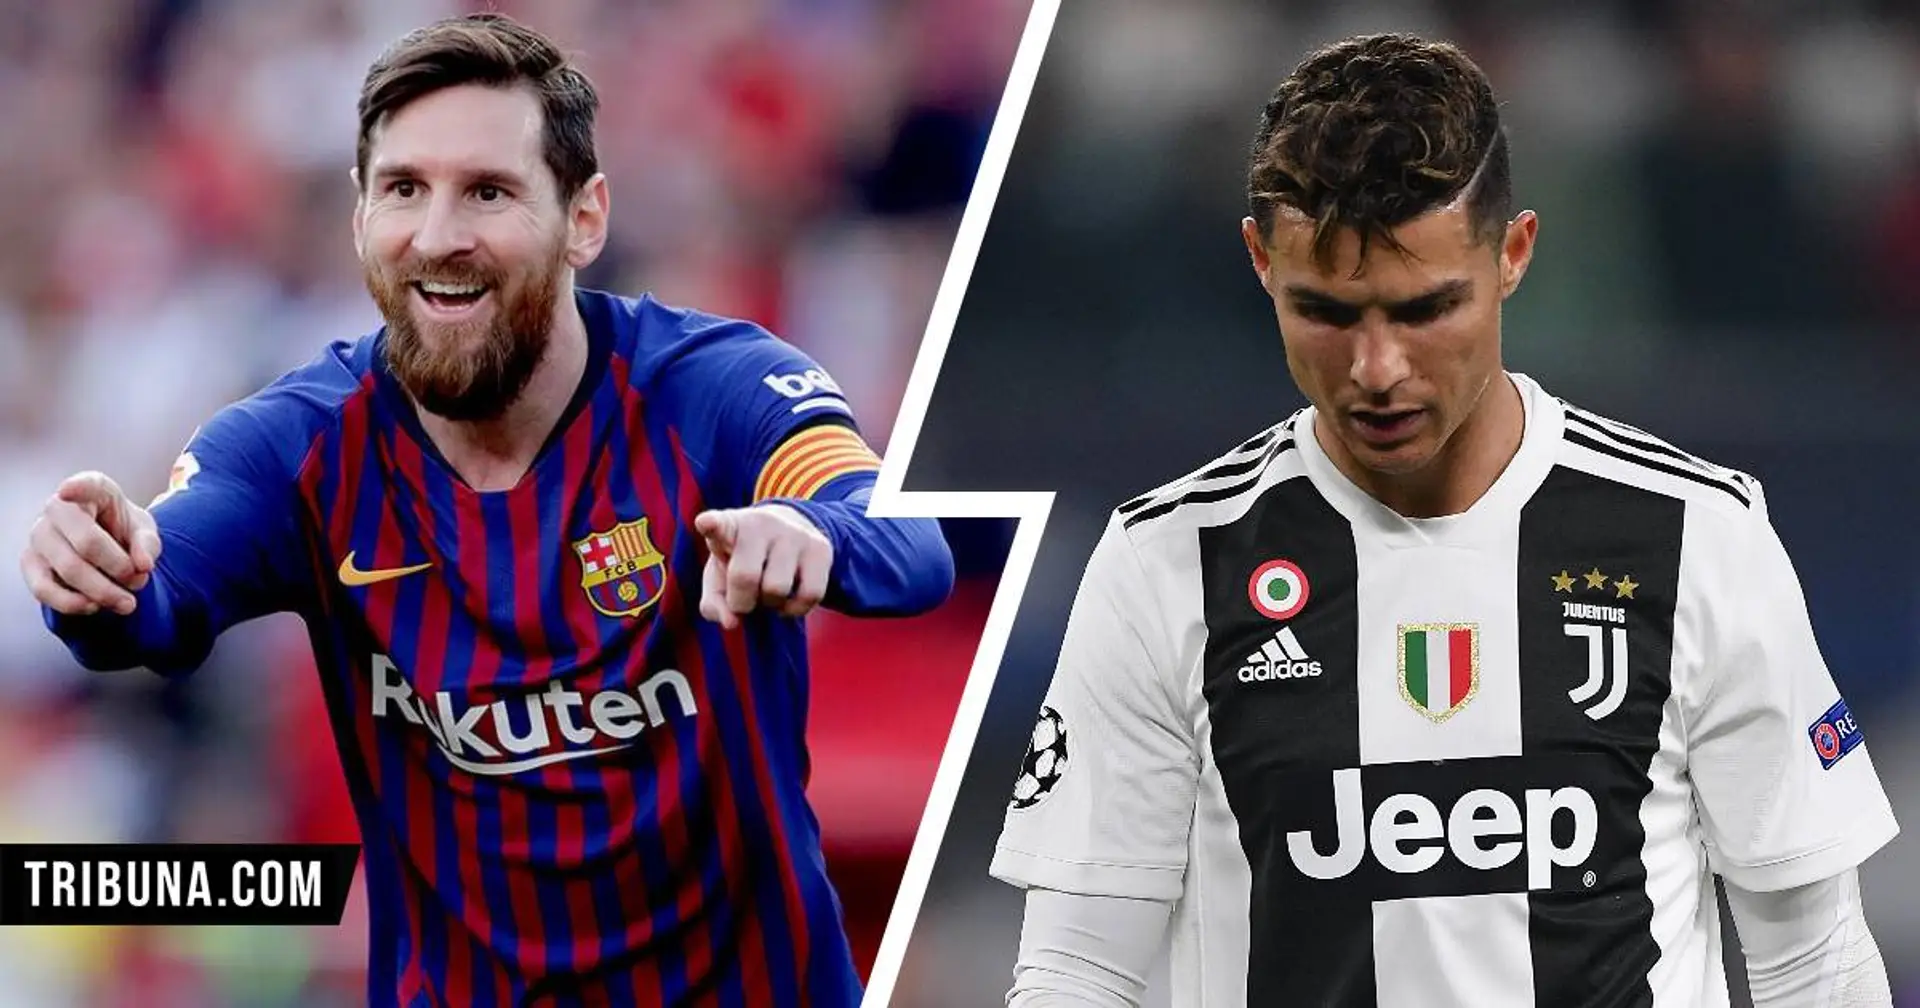 Comparing Lionel Messi, Cristiano Ronaldo and Neymar records after 700 games